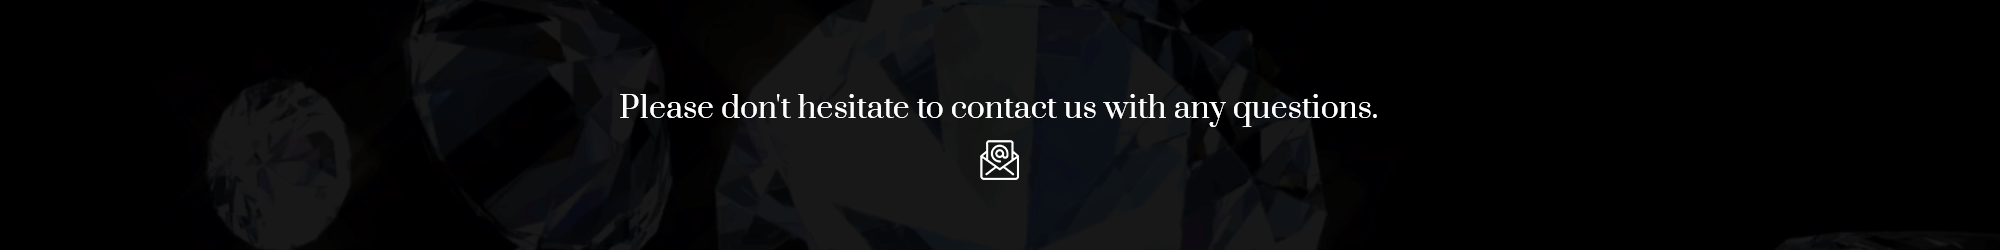 Please don't hesitate to contact us with any questions.